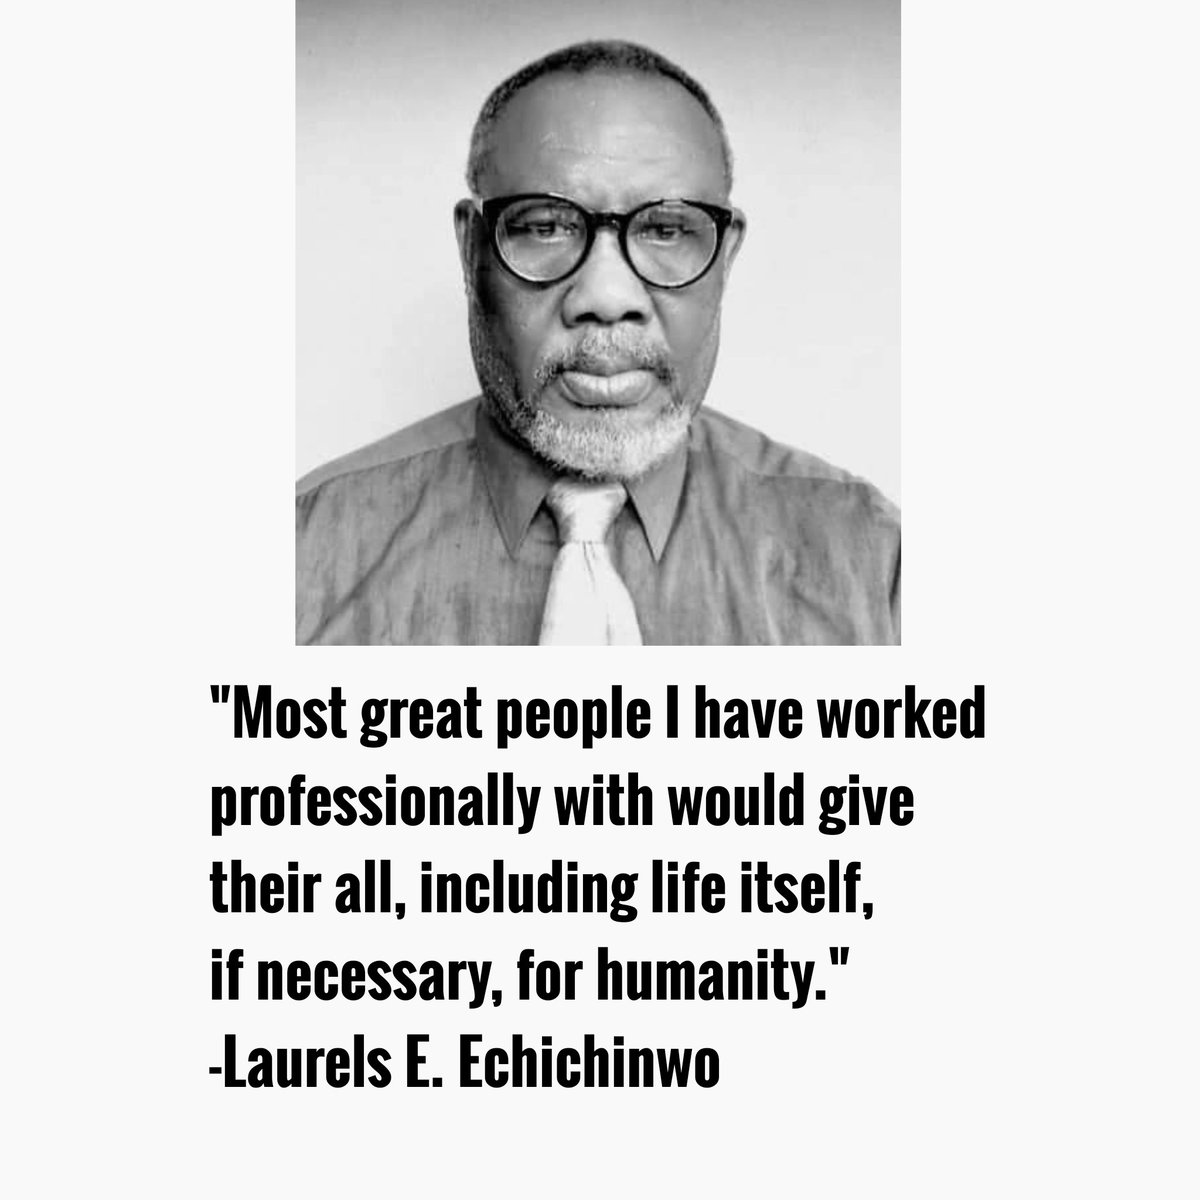 'Most great people I have worked professionally with would give their all, including life itself, if necessary, for humanity.' -Laurels E. Echichinwo 
#laurelsechichinwoinspirationalquotes